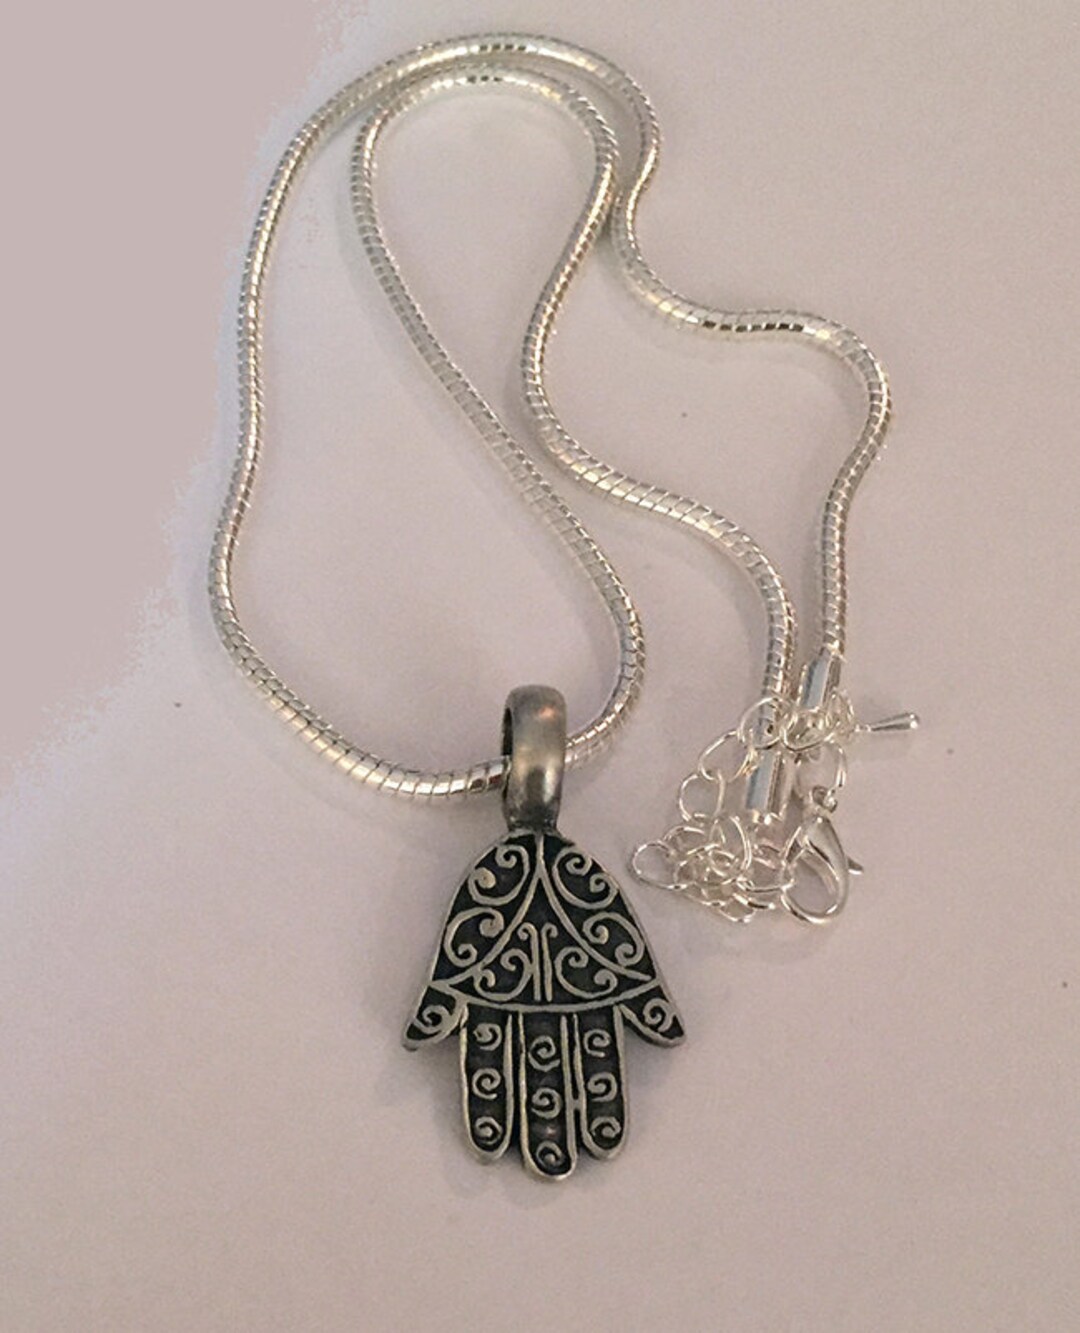 Solid Pewter Hamsa Necklace Hand of Fatima Necklace Jewish - Etsy